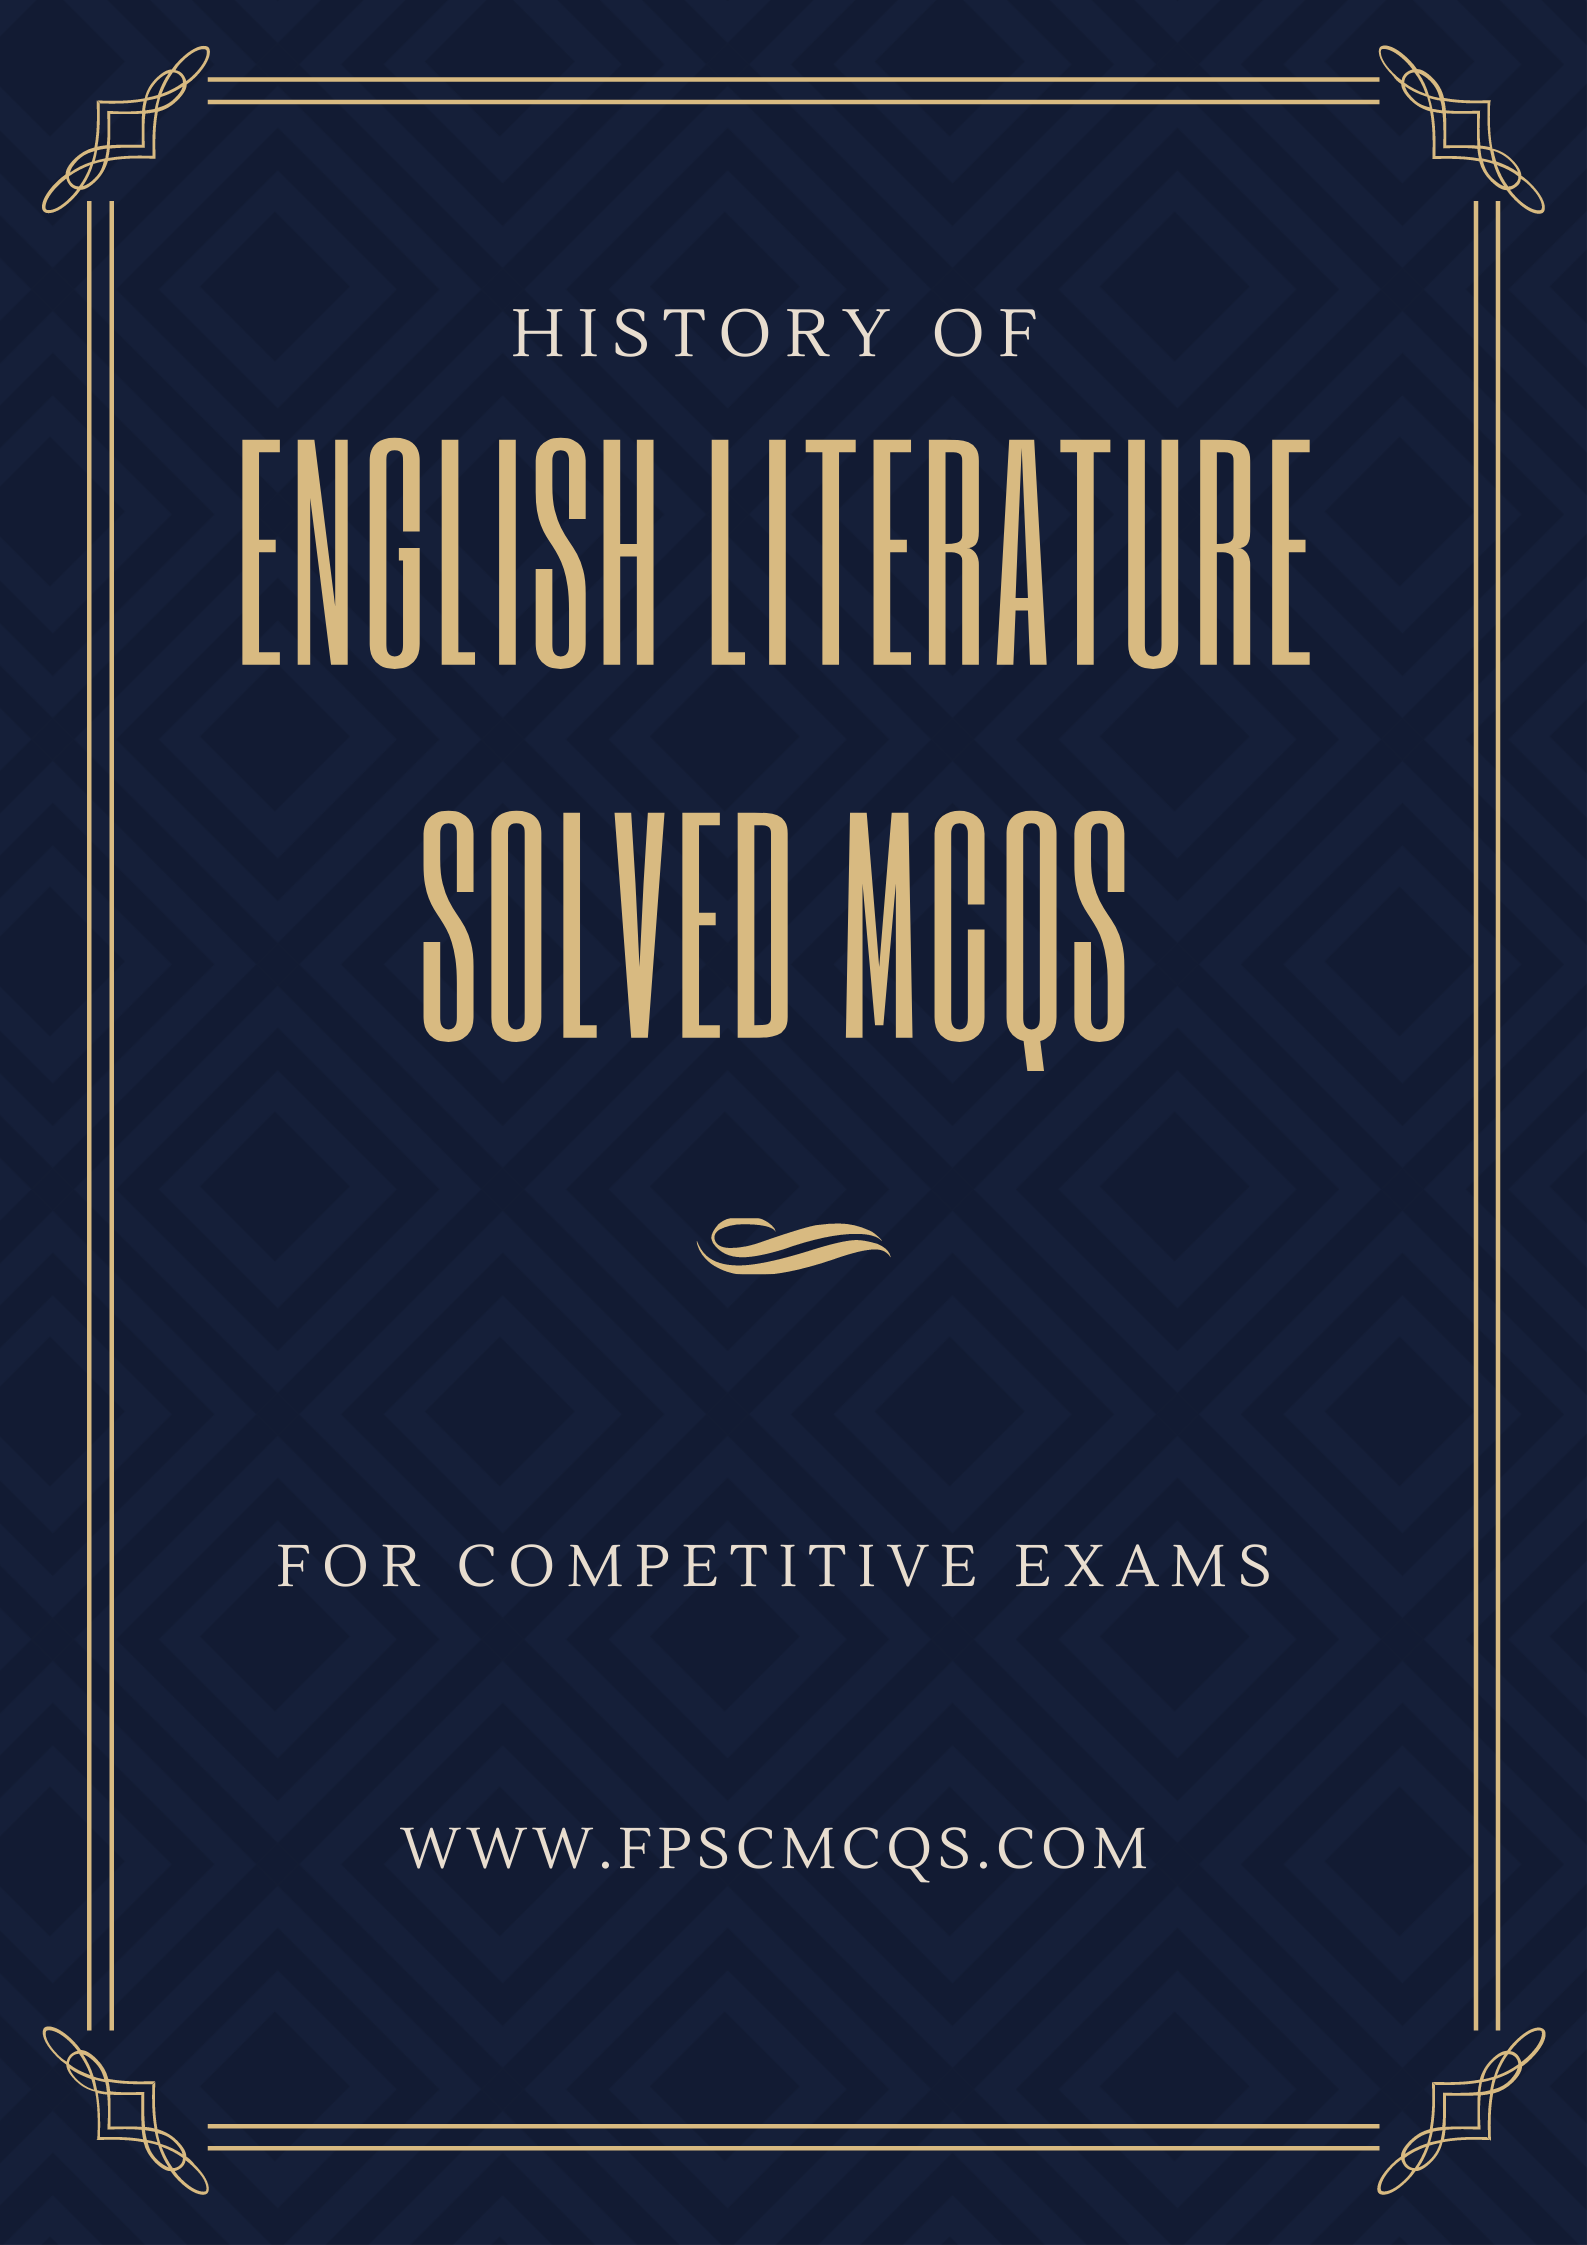 English Literature Mcqs For Competitive Exams